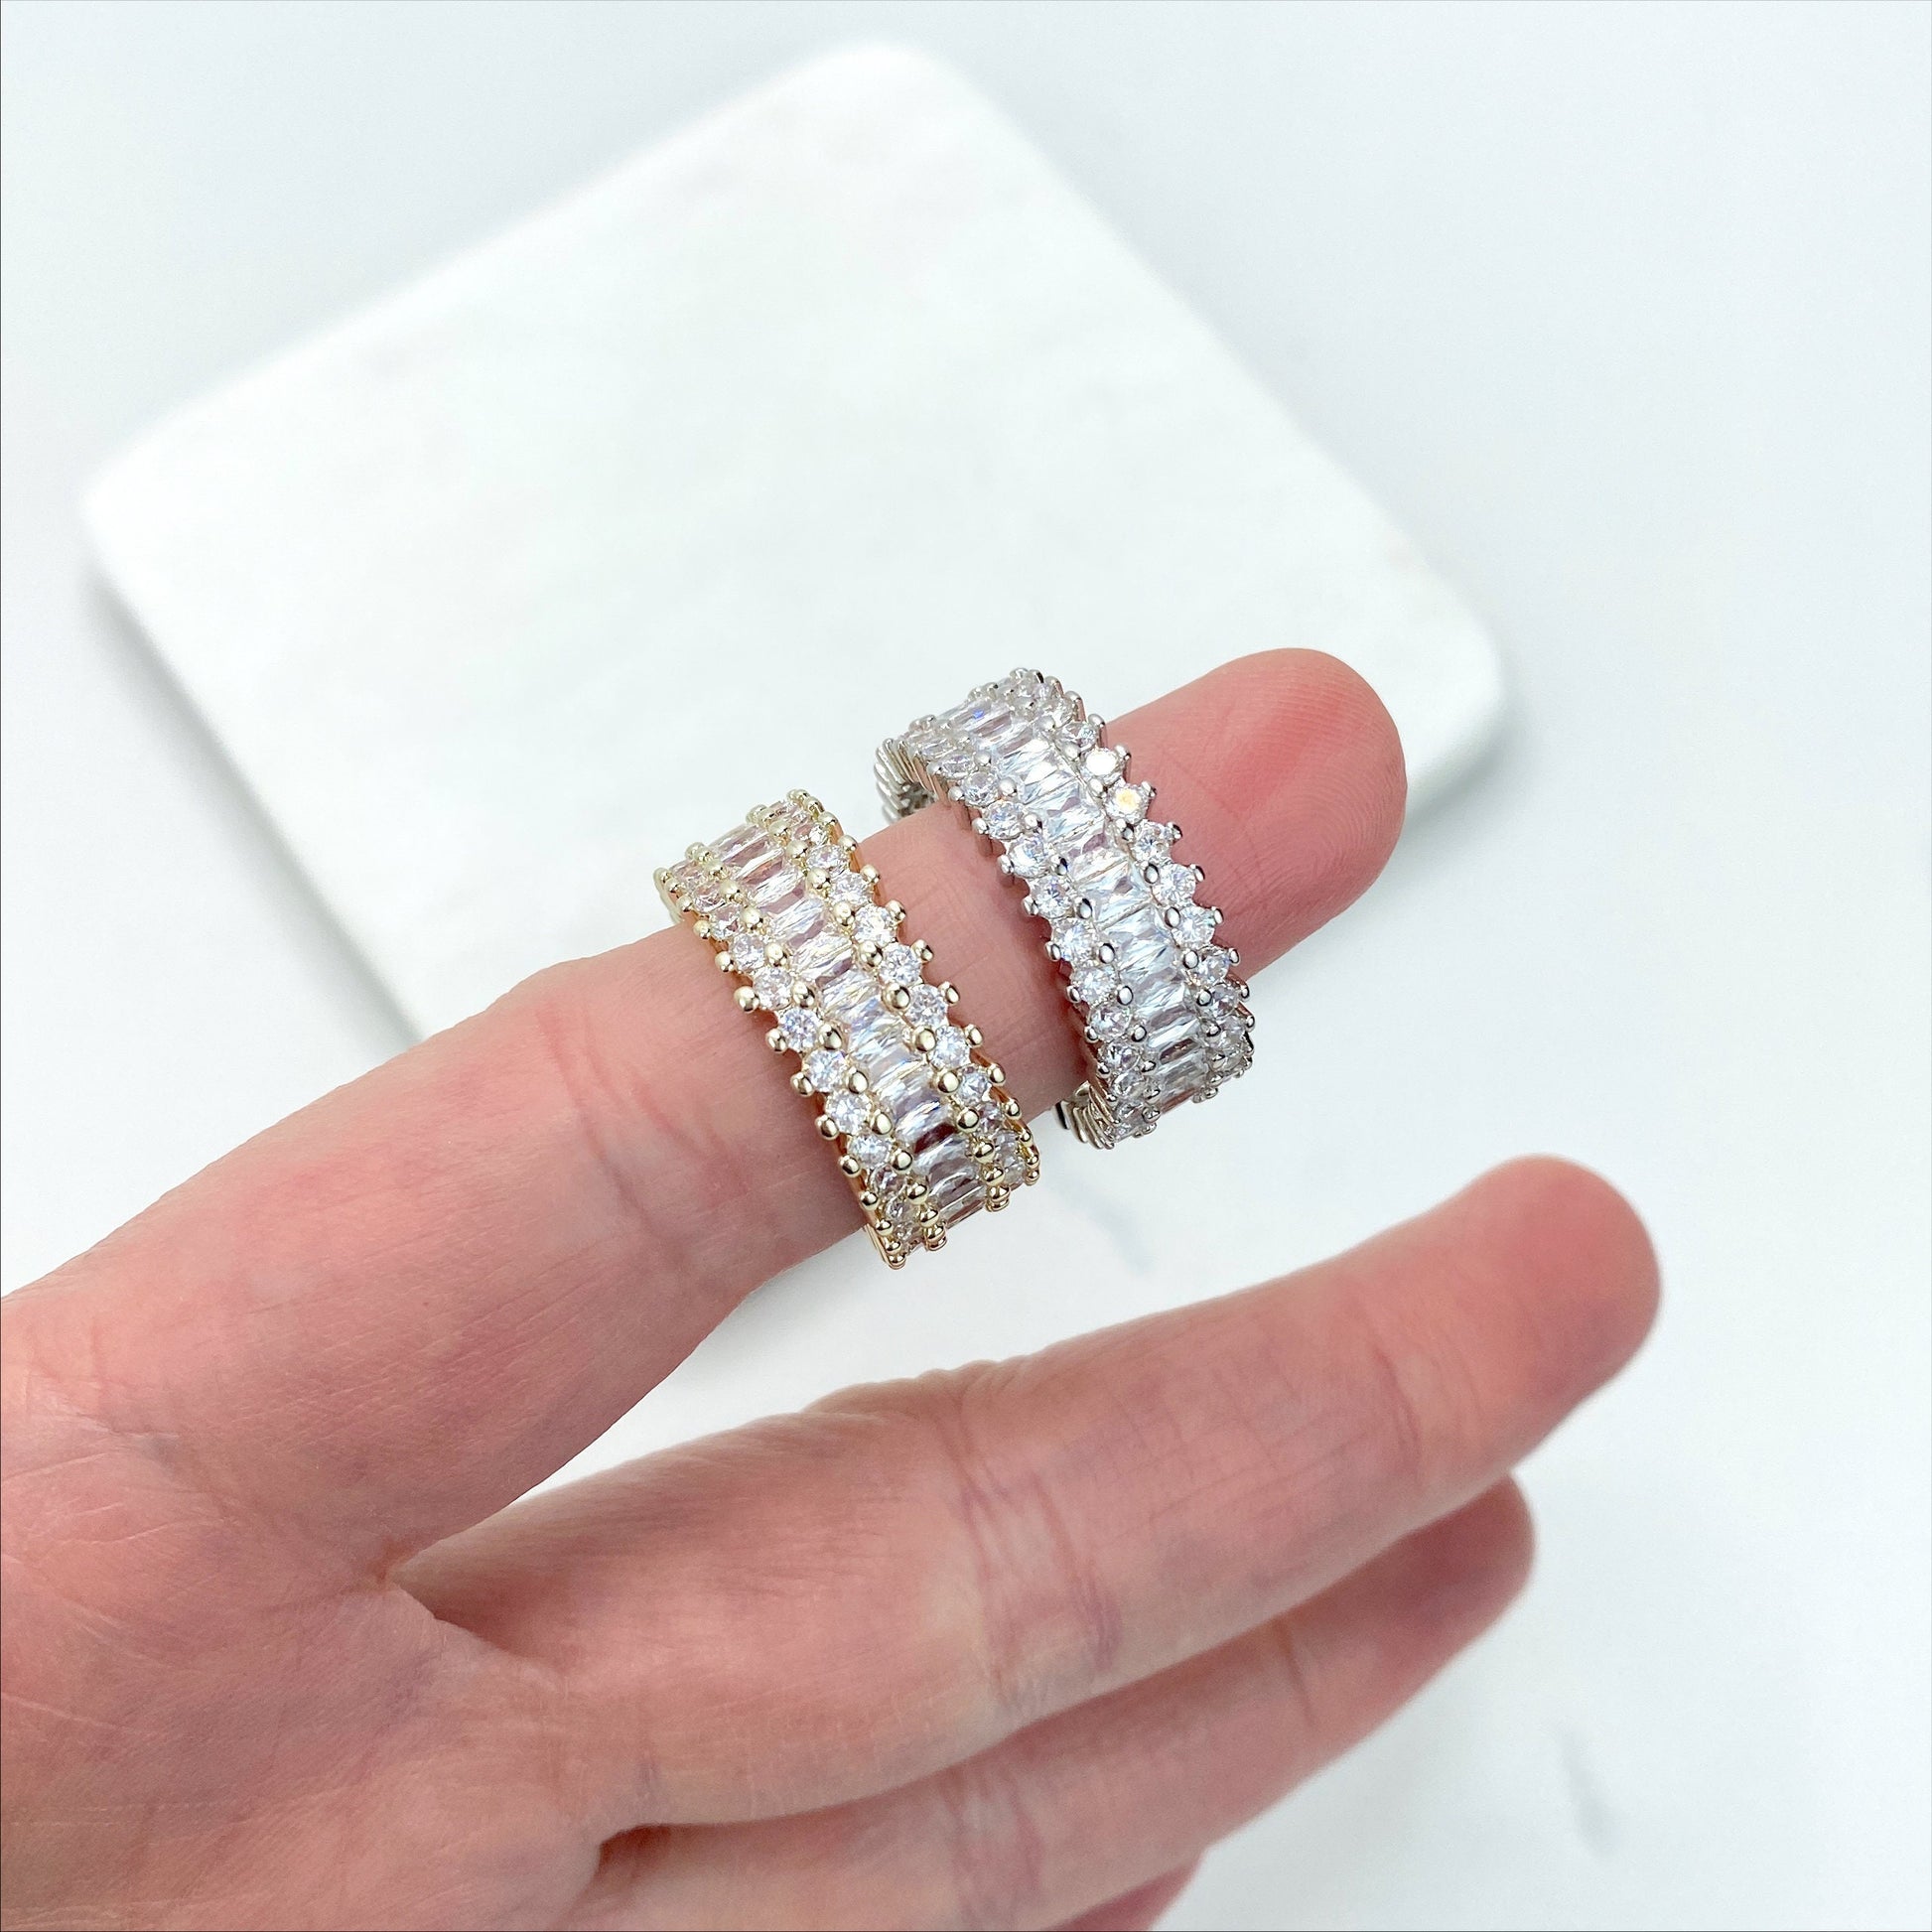 18k Gold Filled Light or White Gold Filled Cubic Zirconia Ring Featuring Baguette Settings Wholesale Jewelry Making Supplies